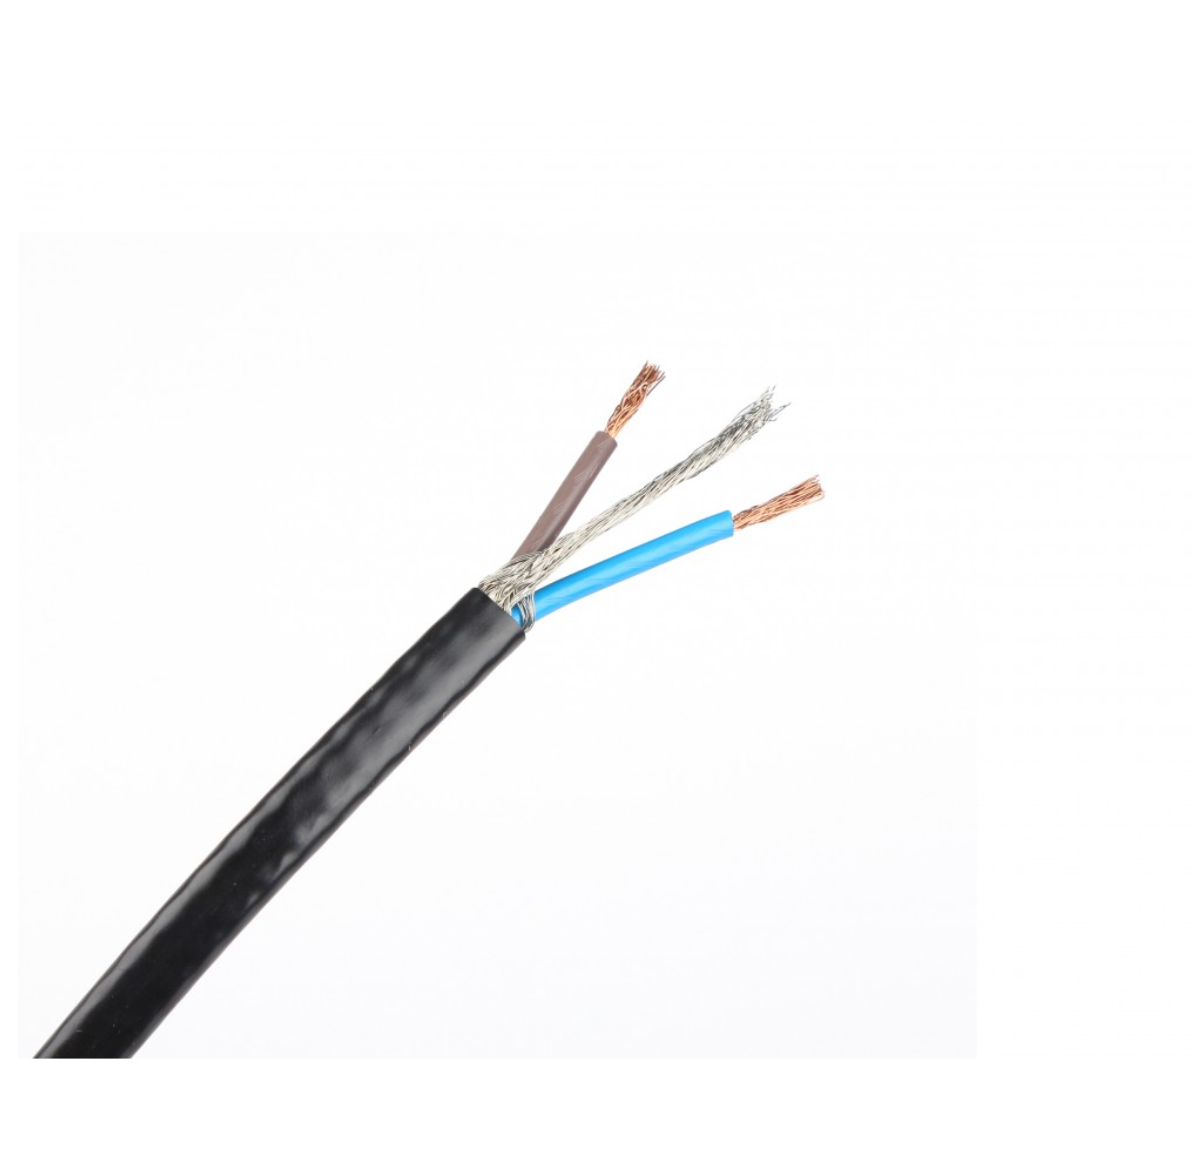 Heating cable - 120m